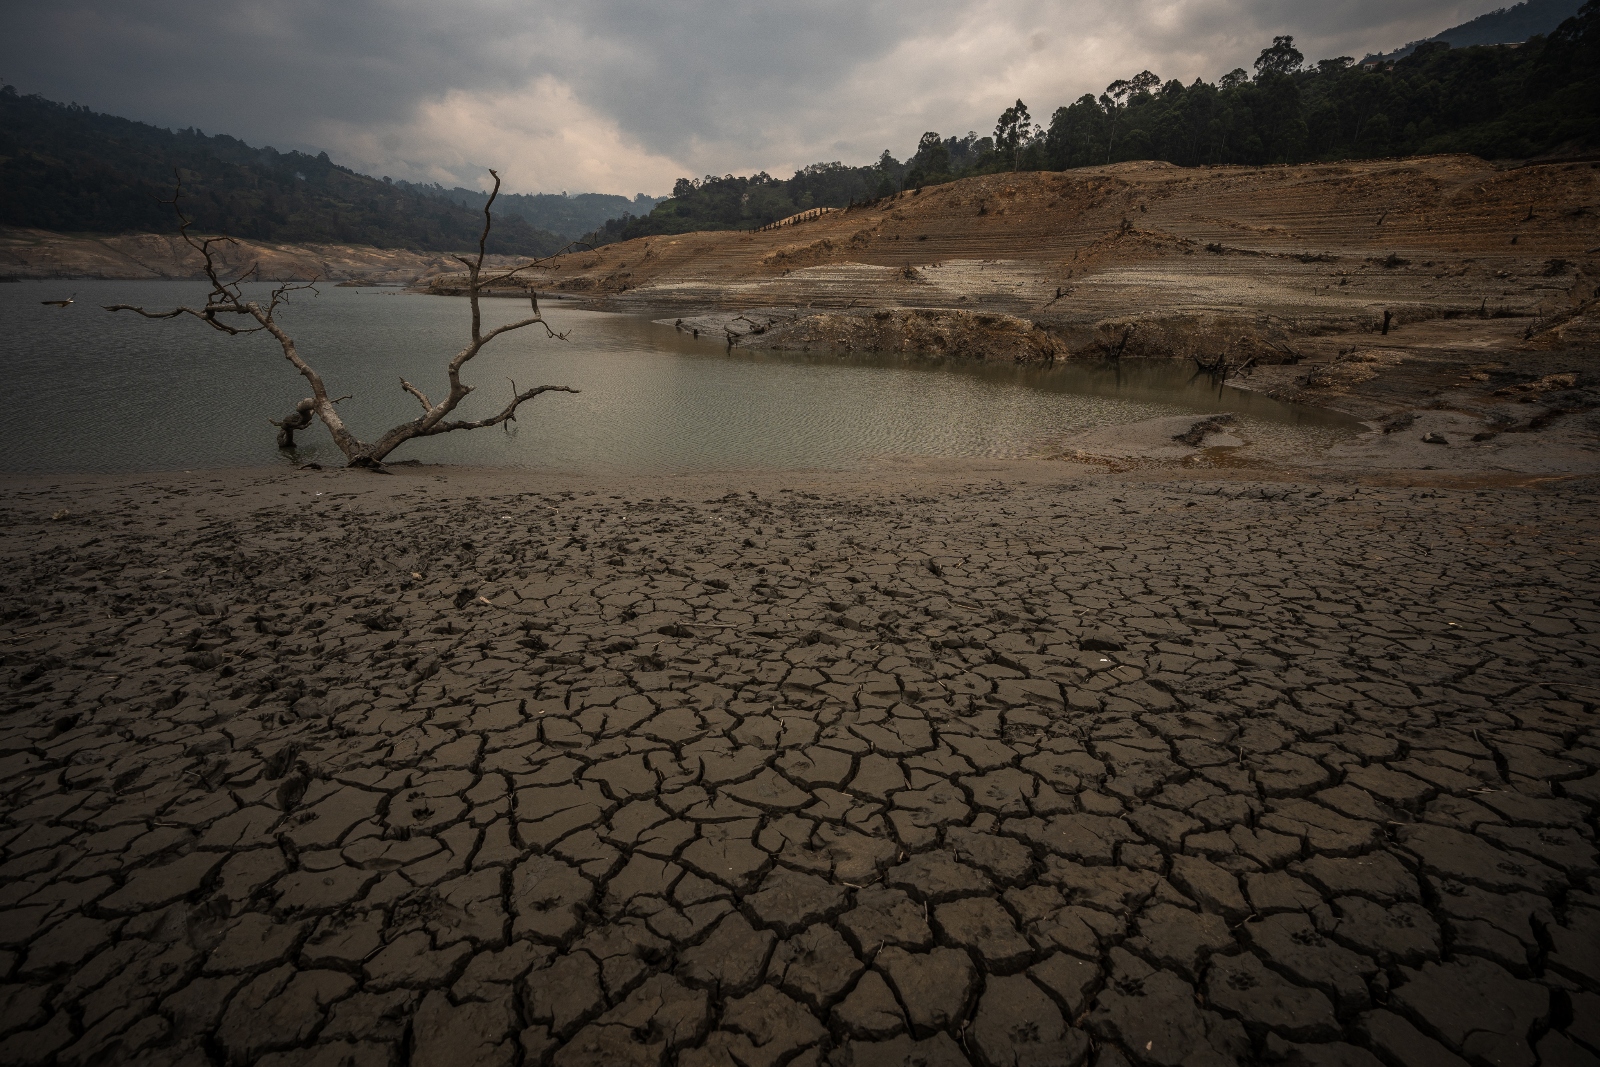 A tree trunk lies on a now dry section of the El Guavio reservoir near Bogotá, Colombia. Reservoirs across the country are emptying out thanks to a major drought caused by the El Niño weather pattern.